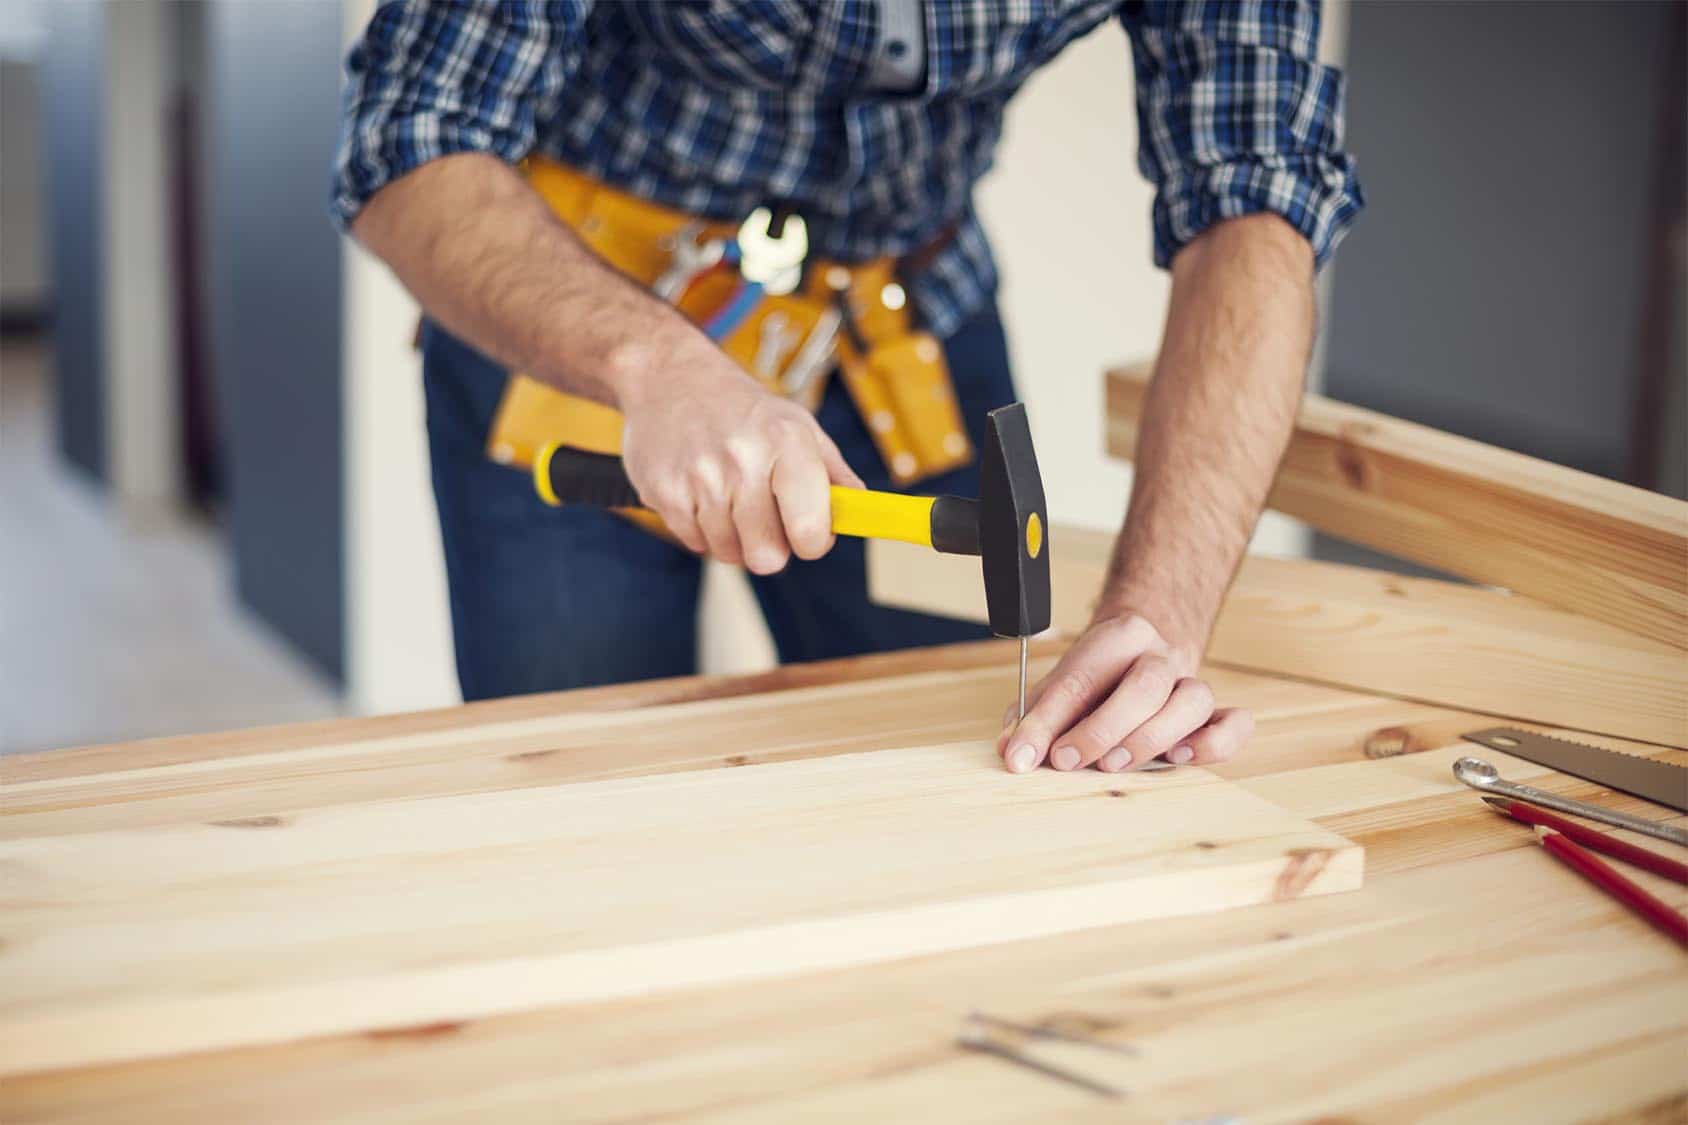 About Handyman services and handyman jobs